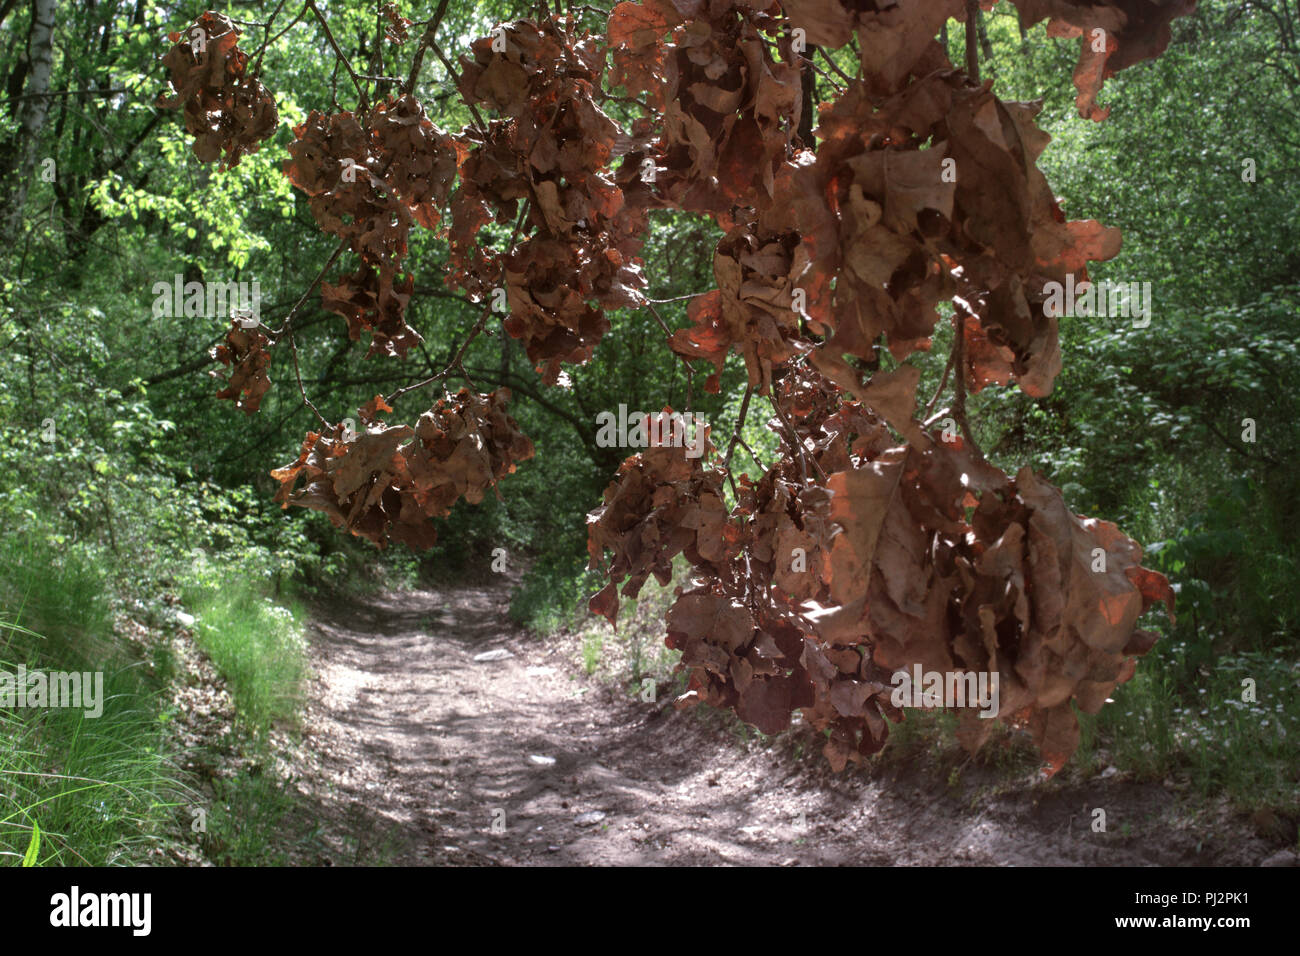 dry oak branch with many withered leaves, hangs over dirt road with ruts, disappearing in depth of dense forest thickets Stock Photo